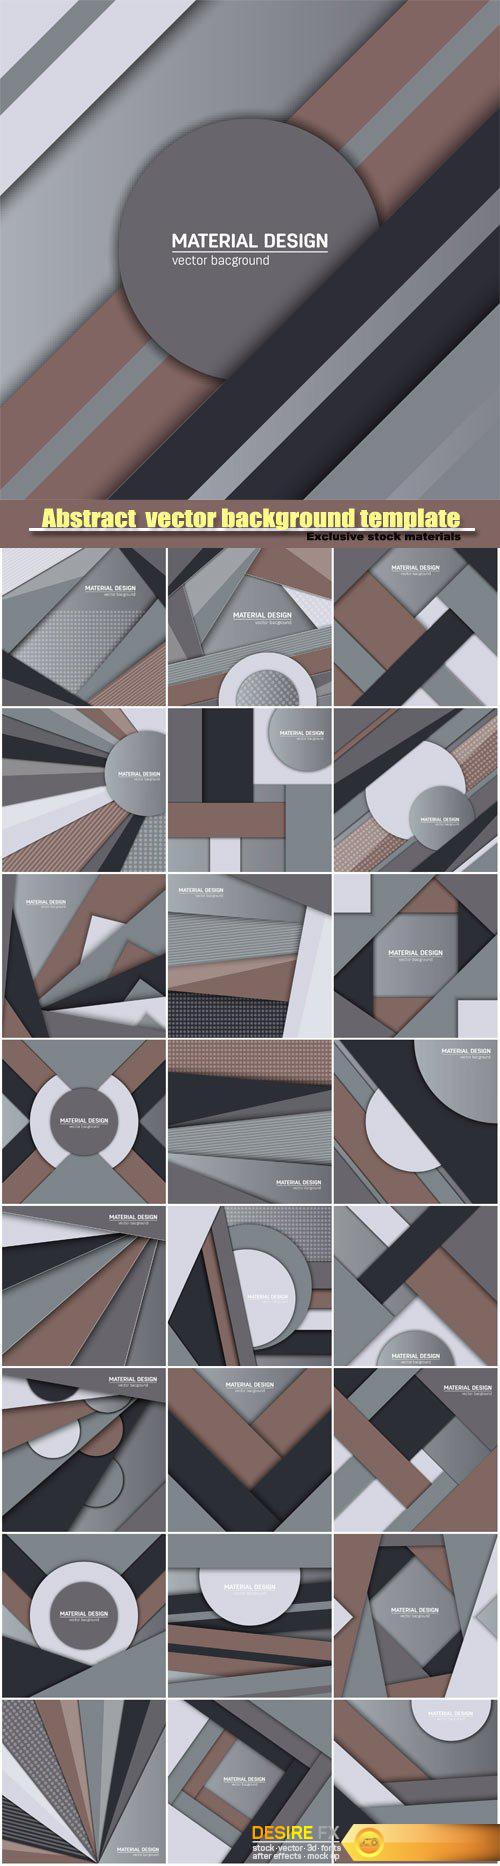 Abstract creative layout vector background template #3